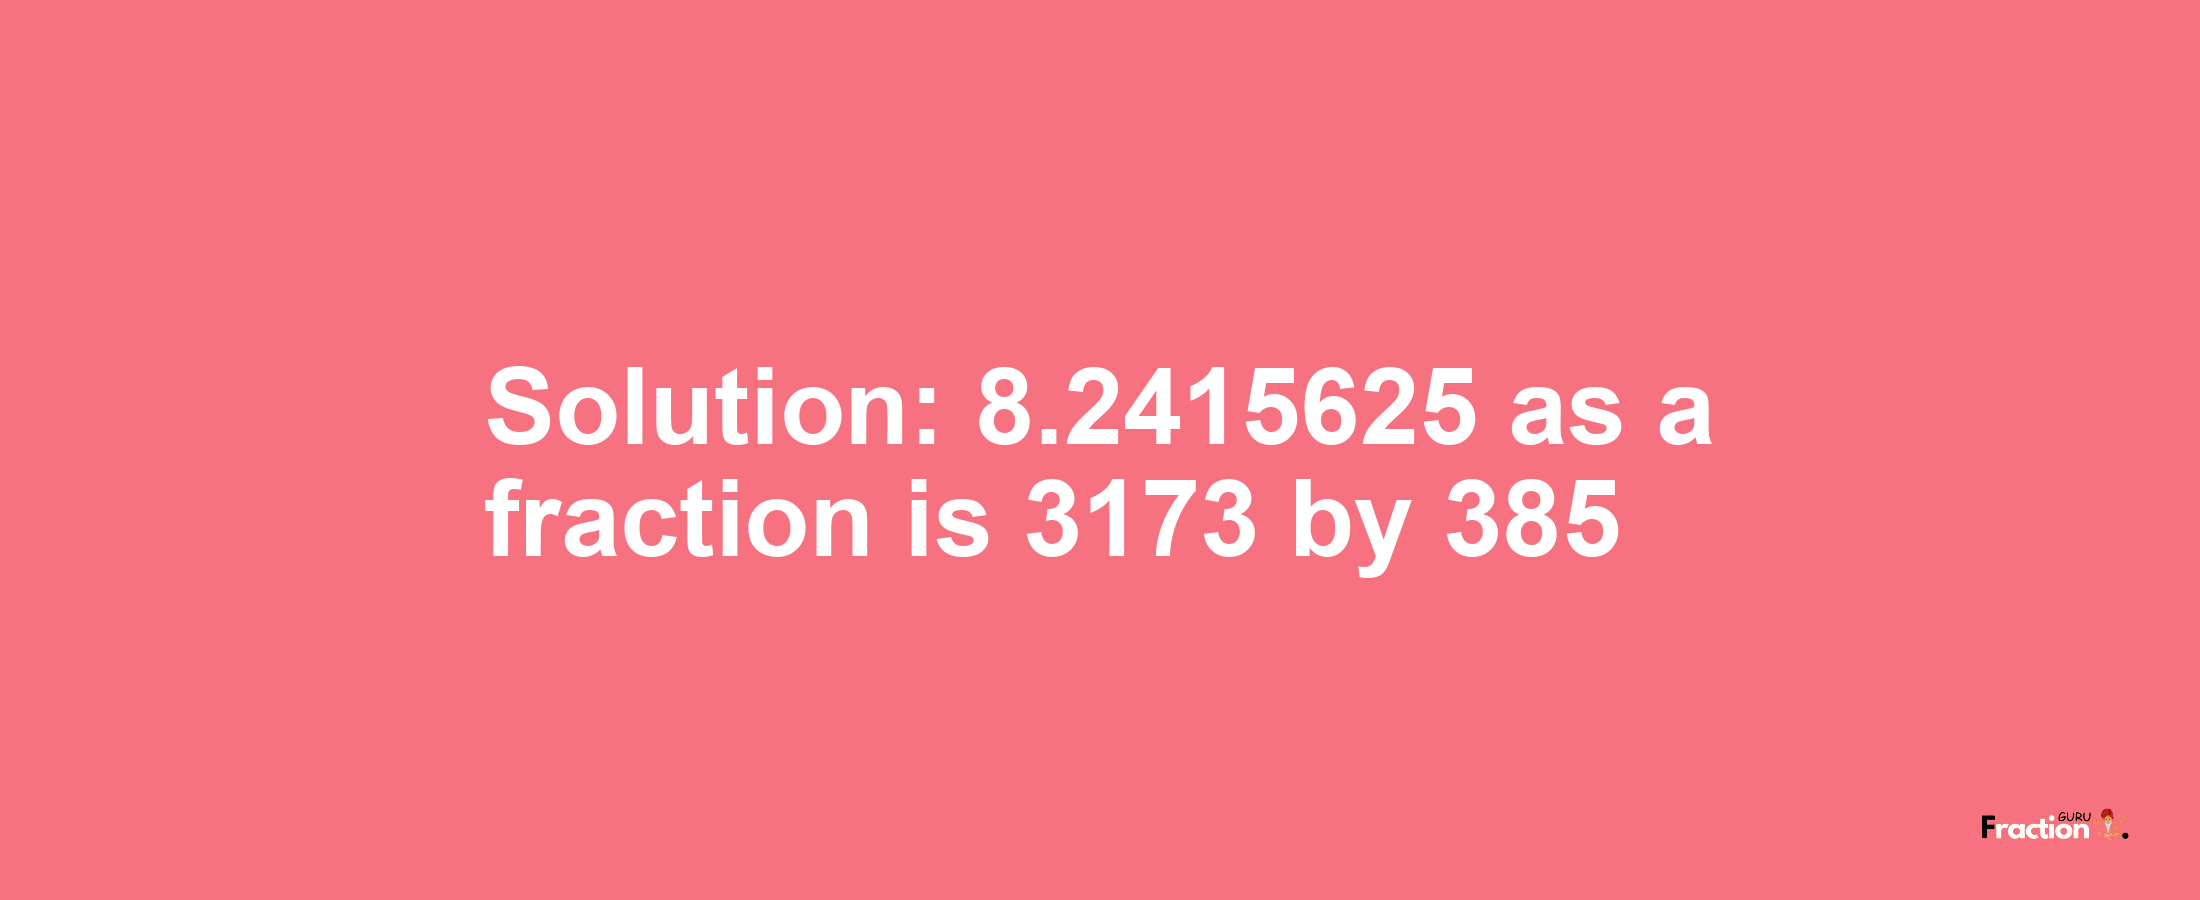 Solution:8.2415625 as a fraction is 3173/385